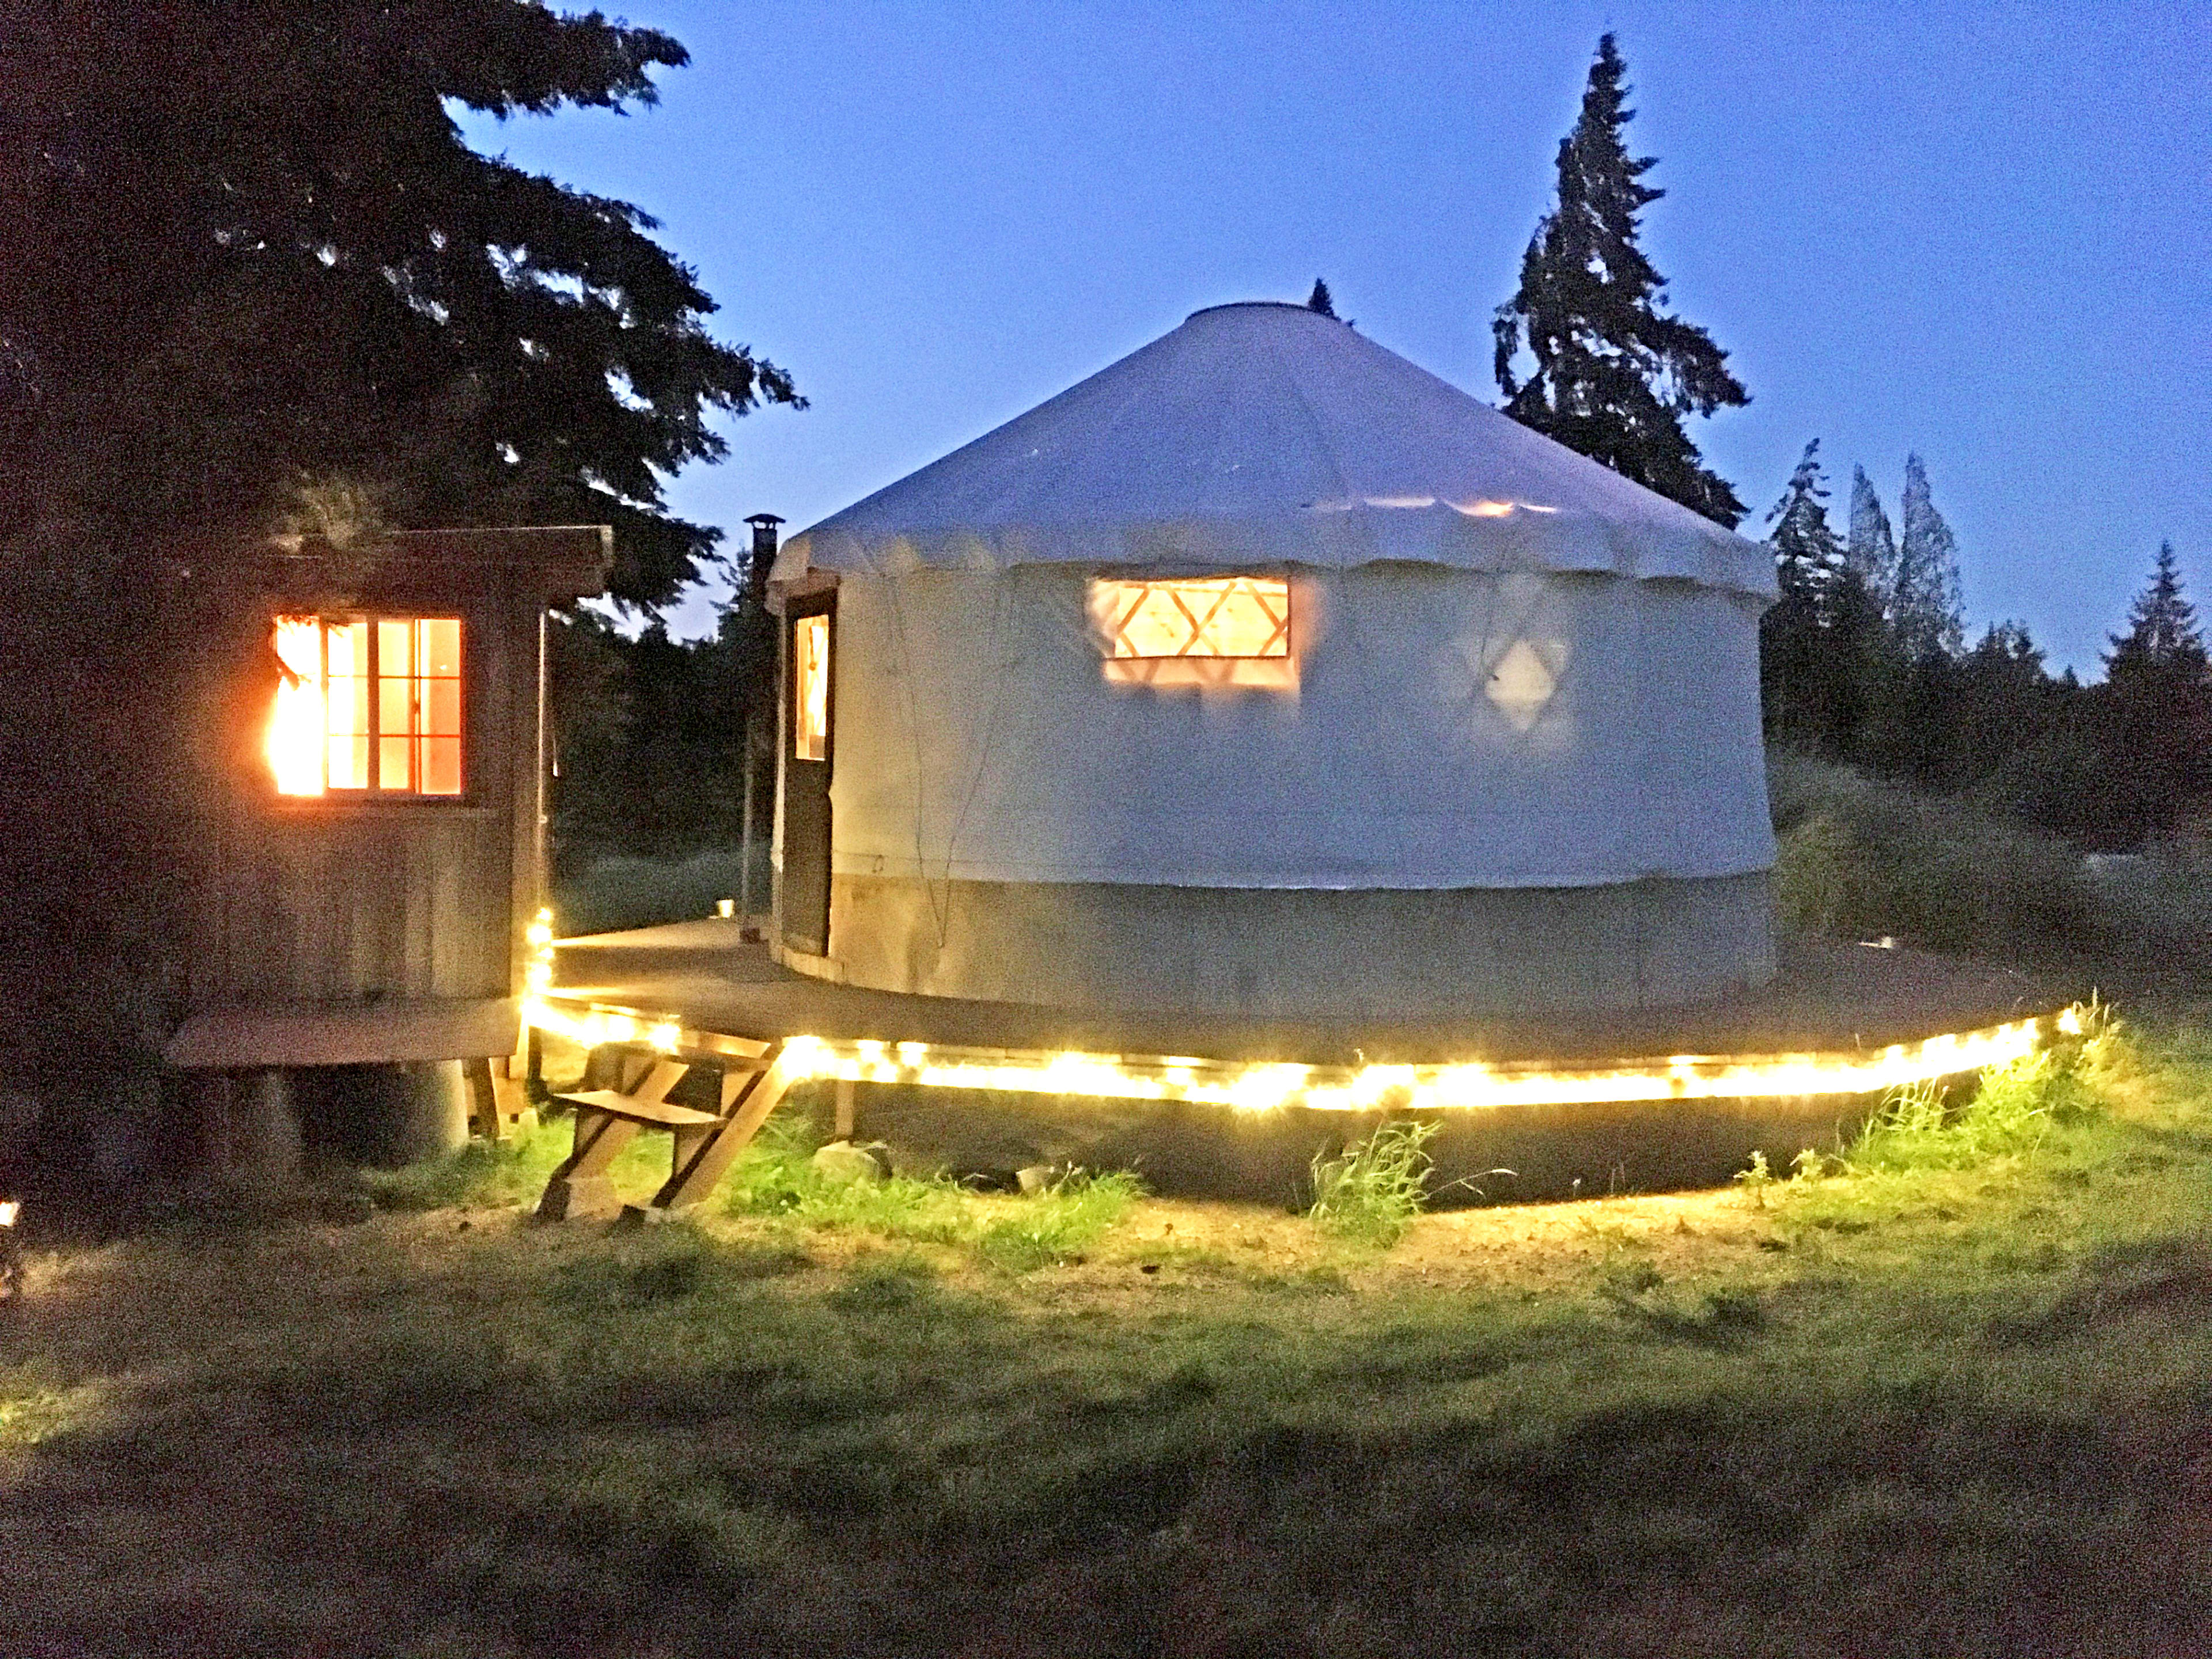 Yurt in the country